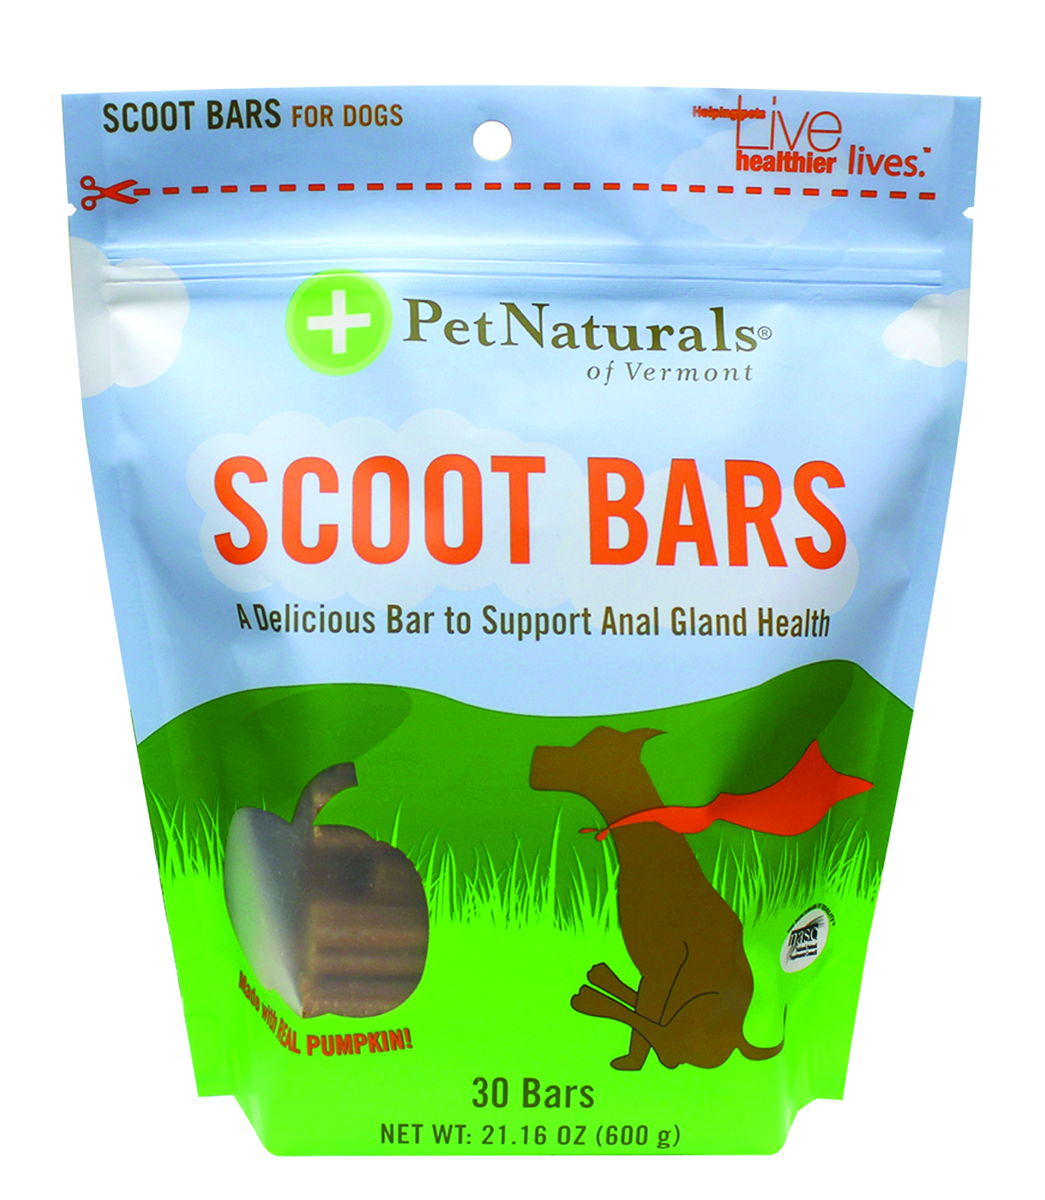 SCOOT BARS FOR DOGS